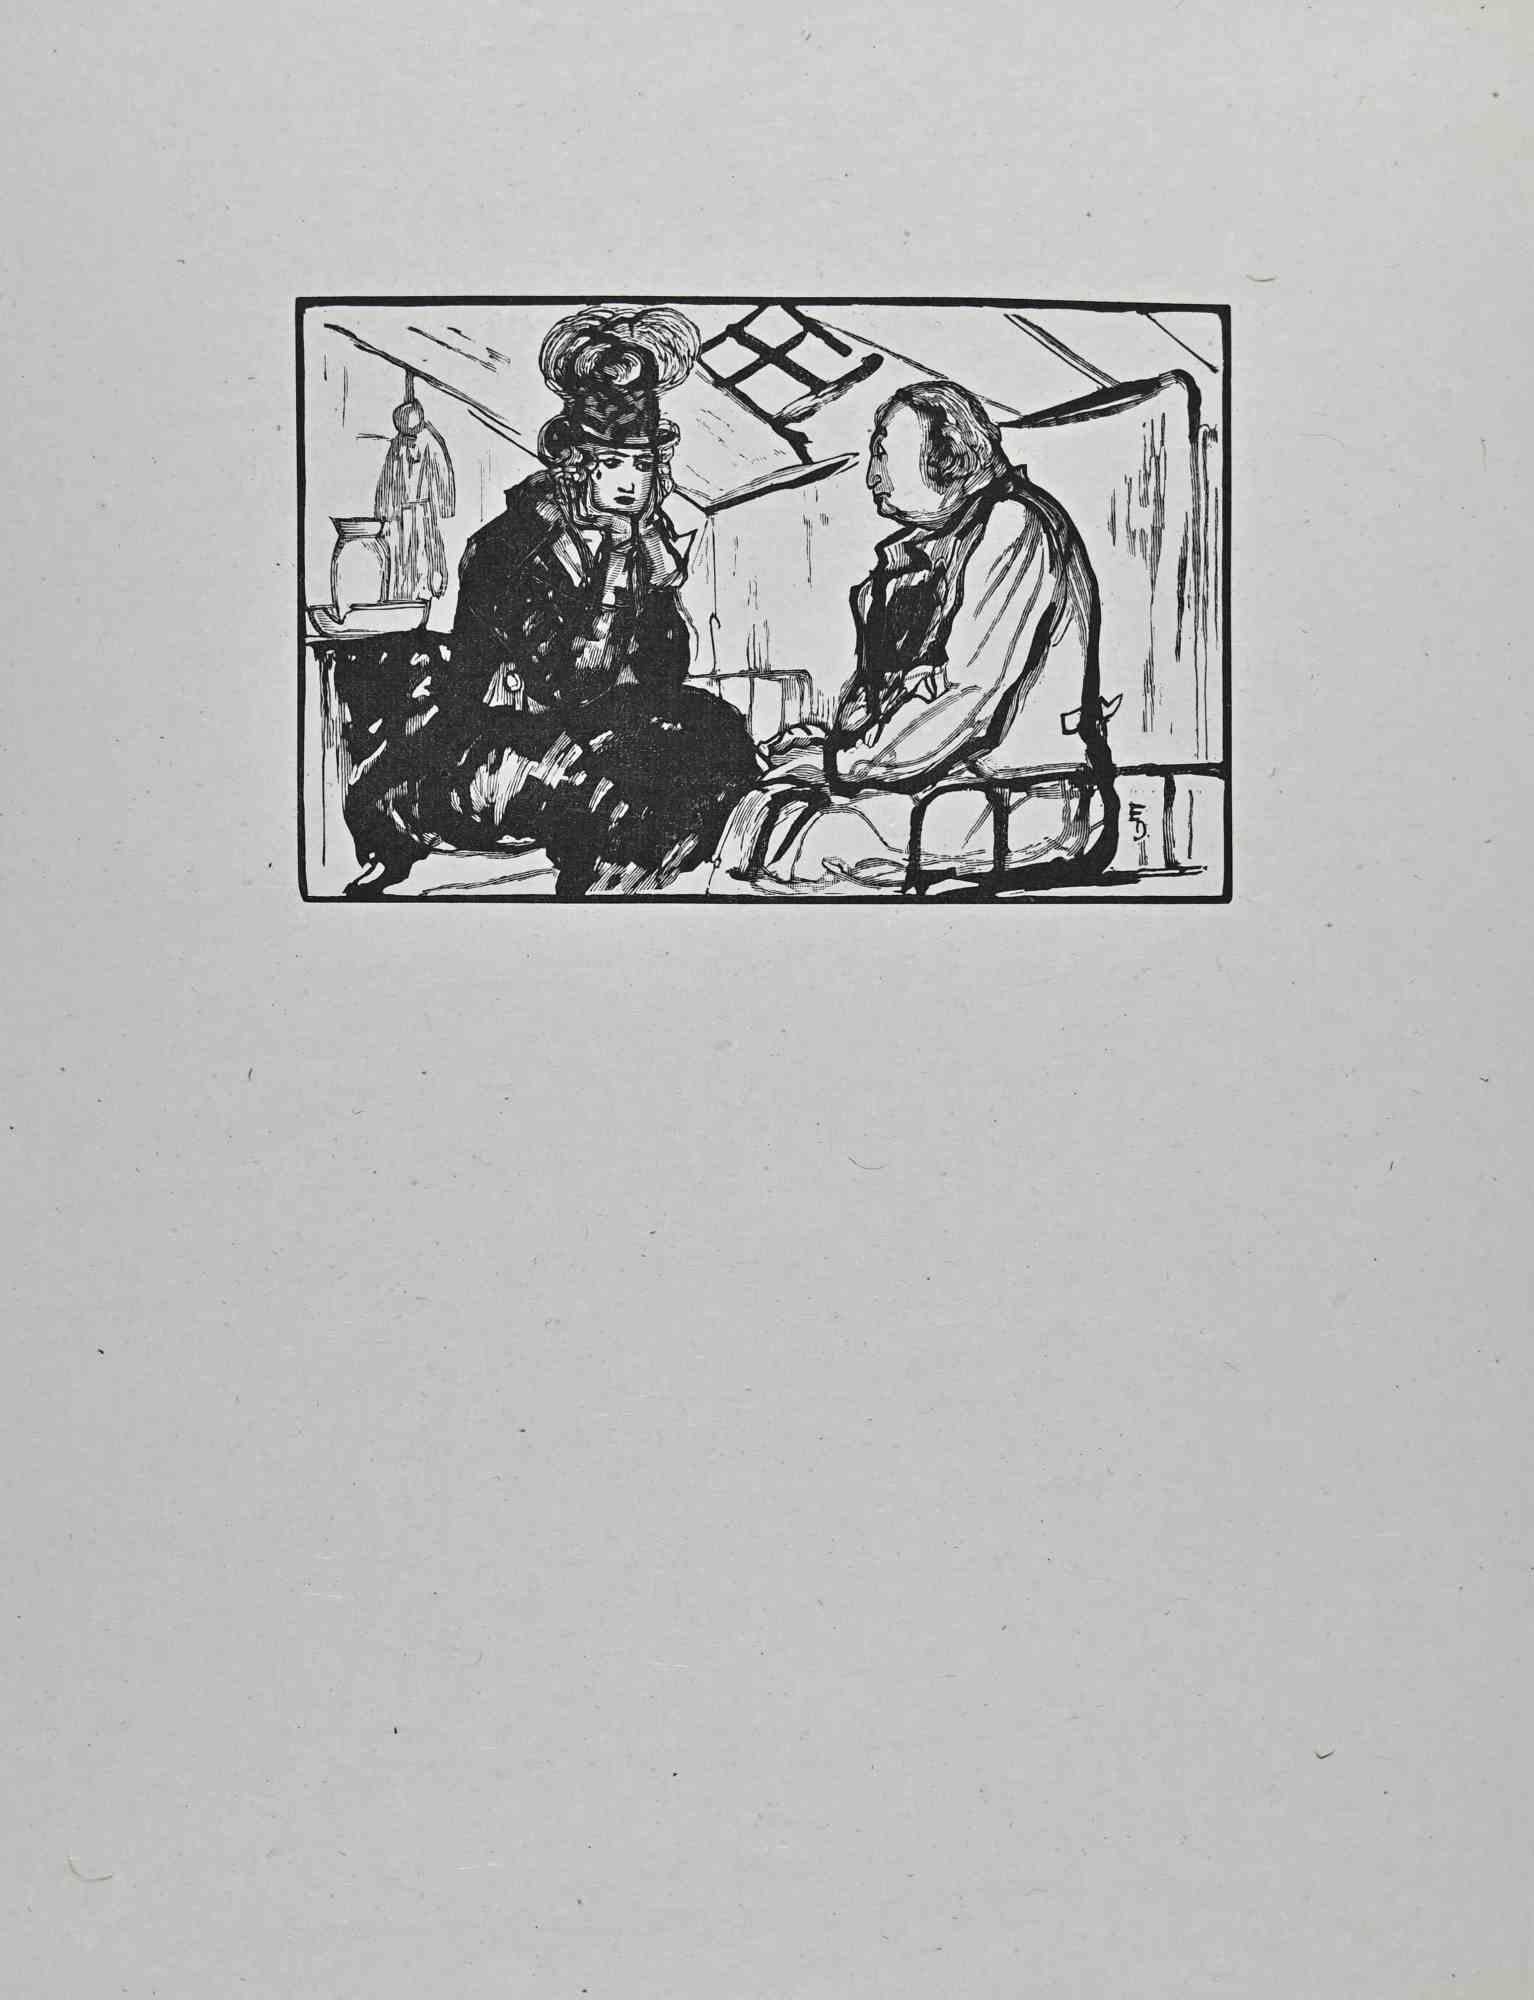 The Sleeping Time is a woodcut print on ivory-colored paper realized by Paul Baudier (1881-1962) in the 1930s.

Good conditions.

Paul Baudier, (born October 18, 1881 in Paris and died December 9, 1962 in Châtillon), was a French painter, engraver